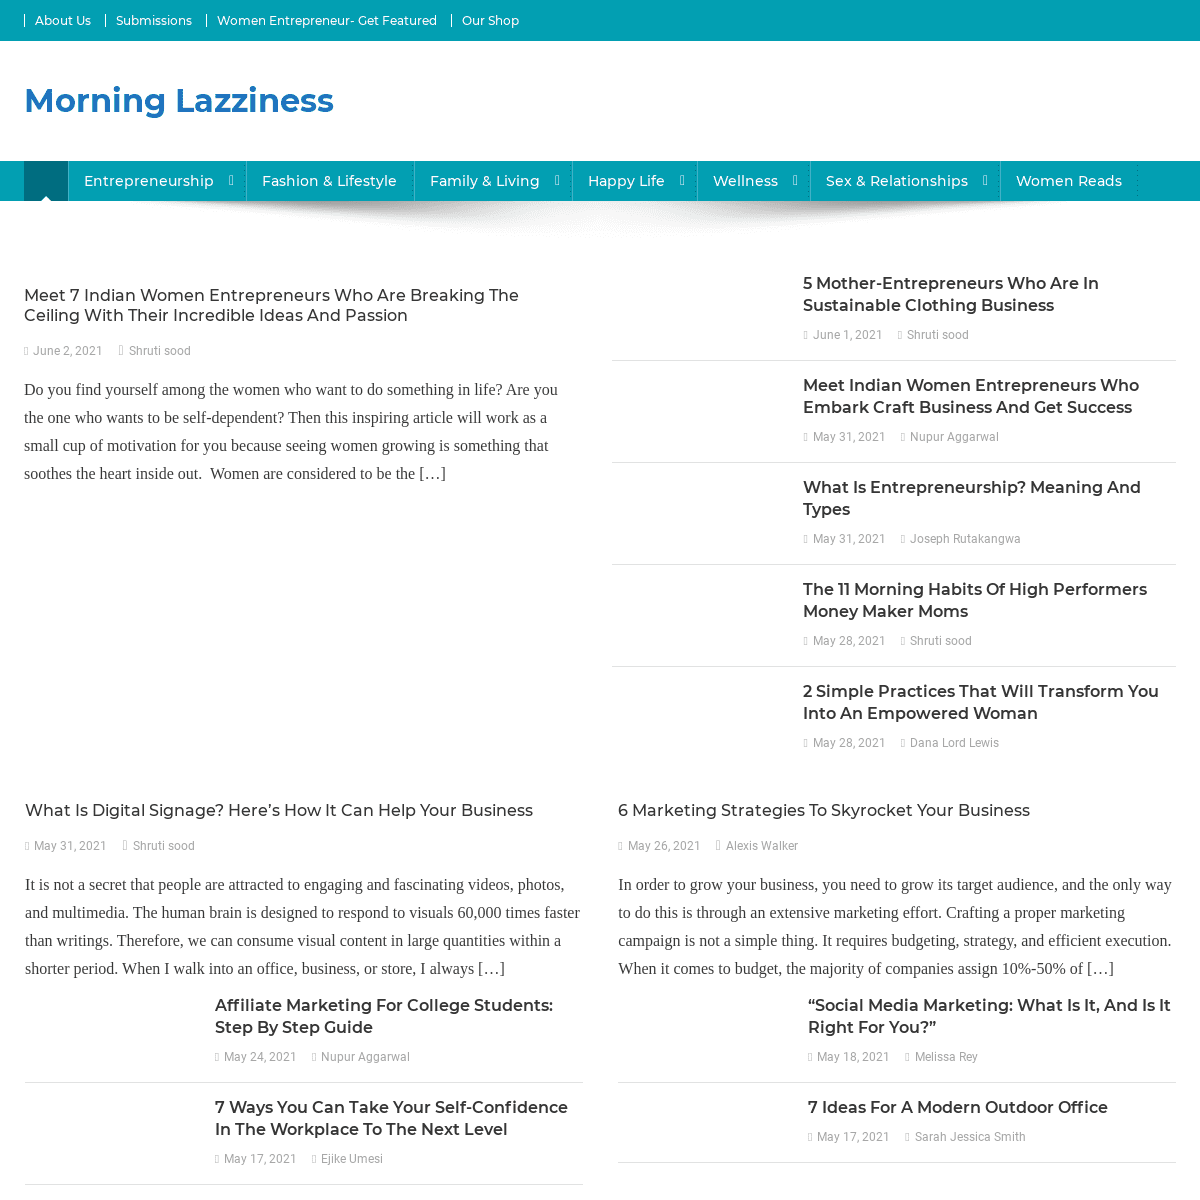 A complete backup of https://morninglazziness.com